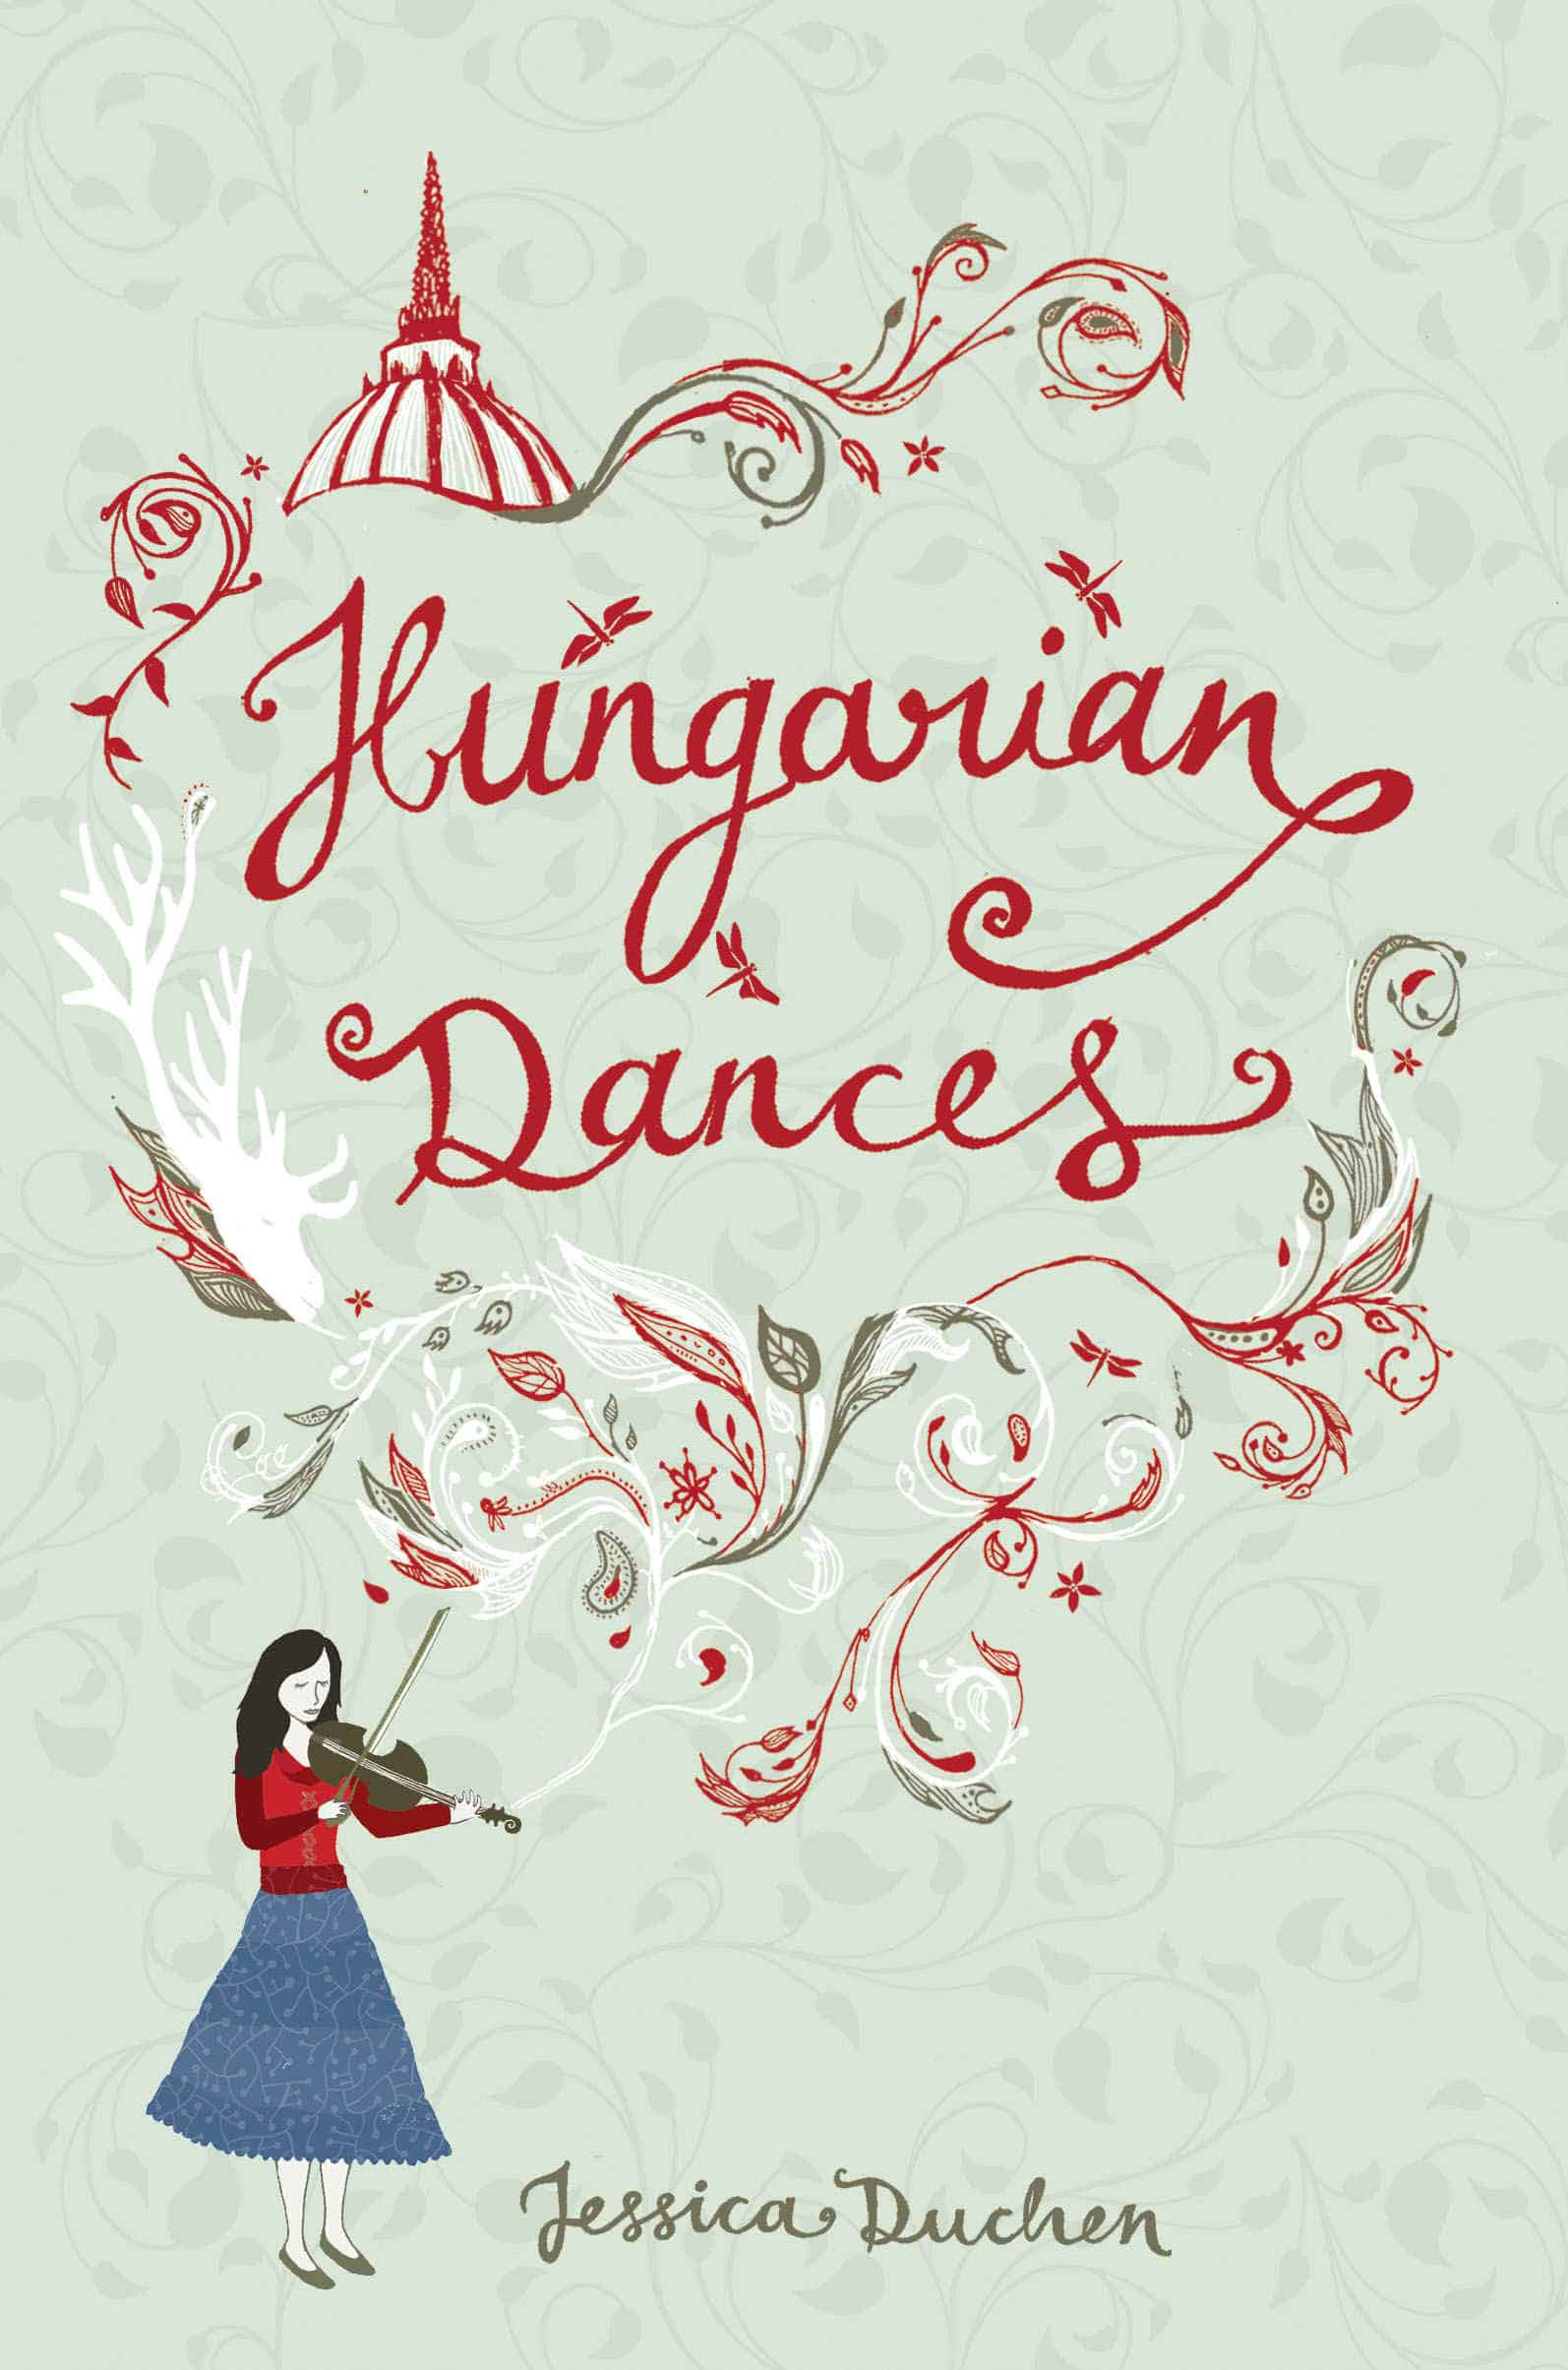 "Hungarian Dances" published by Hodder & Stoughton, March 2008.